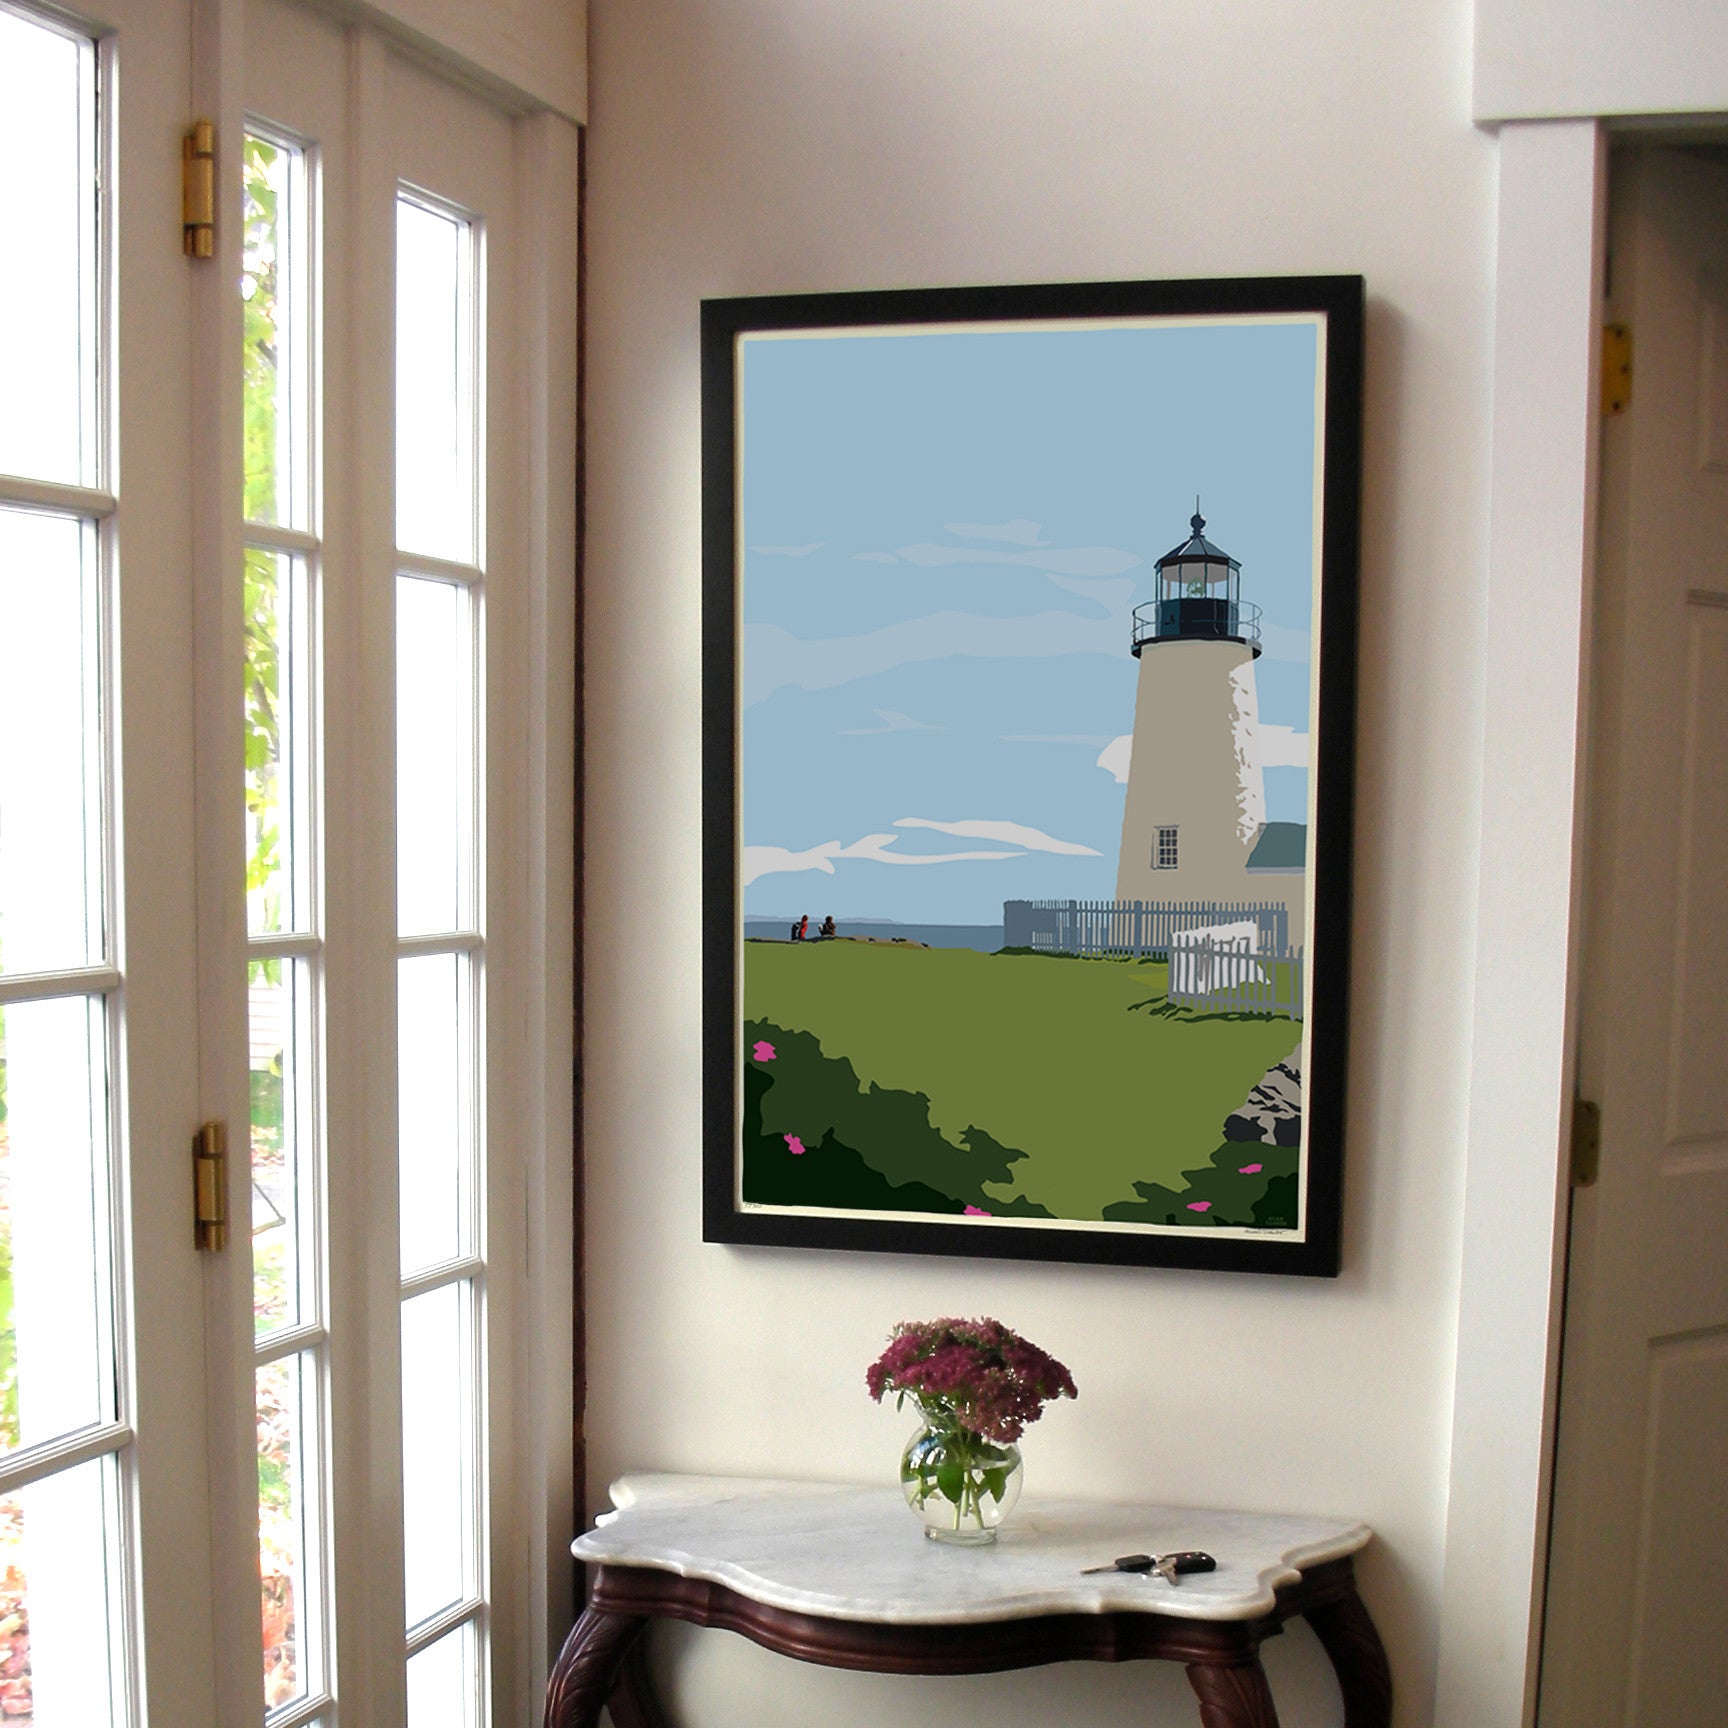 Pemaquid Point Light Hikers Art Print 24" x 36" Framed Wall Poster By Alan Claude  - Maine